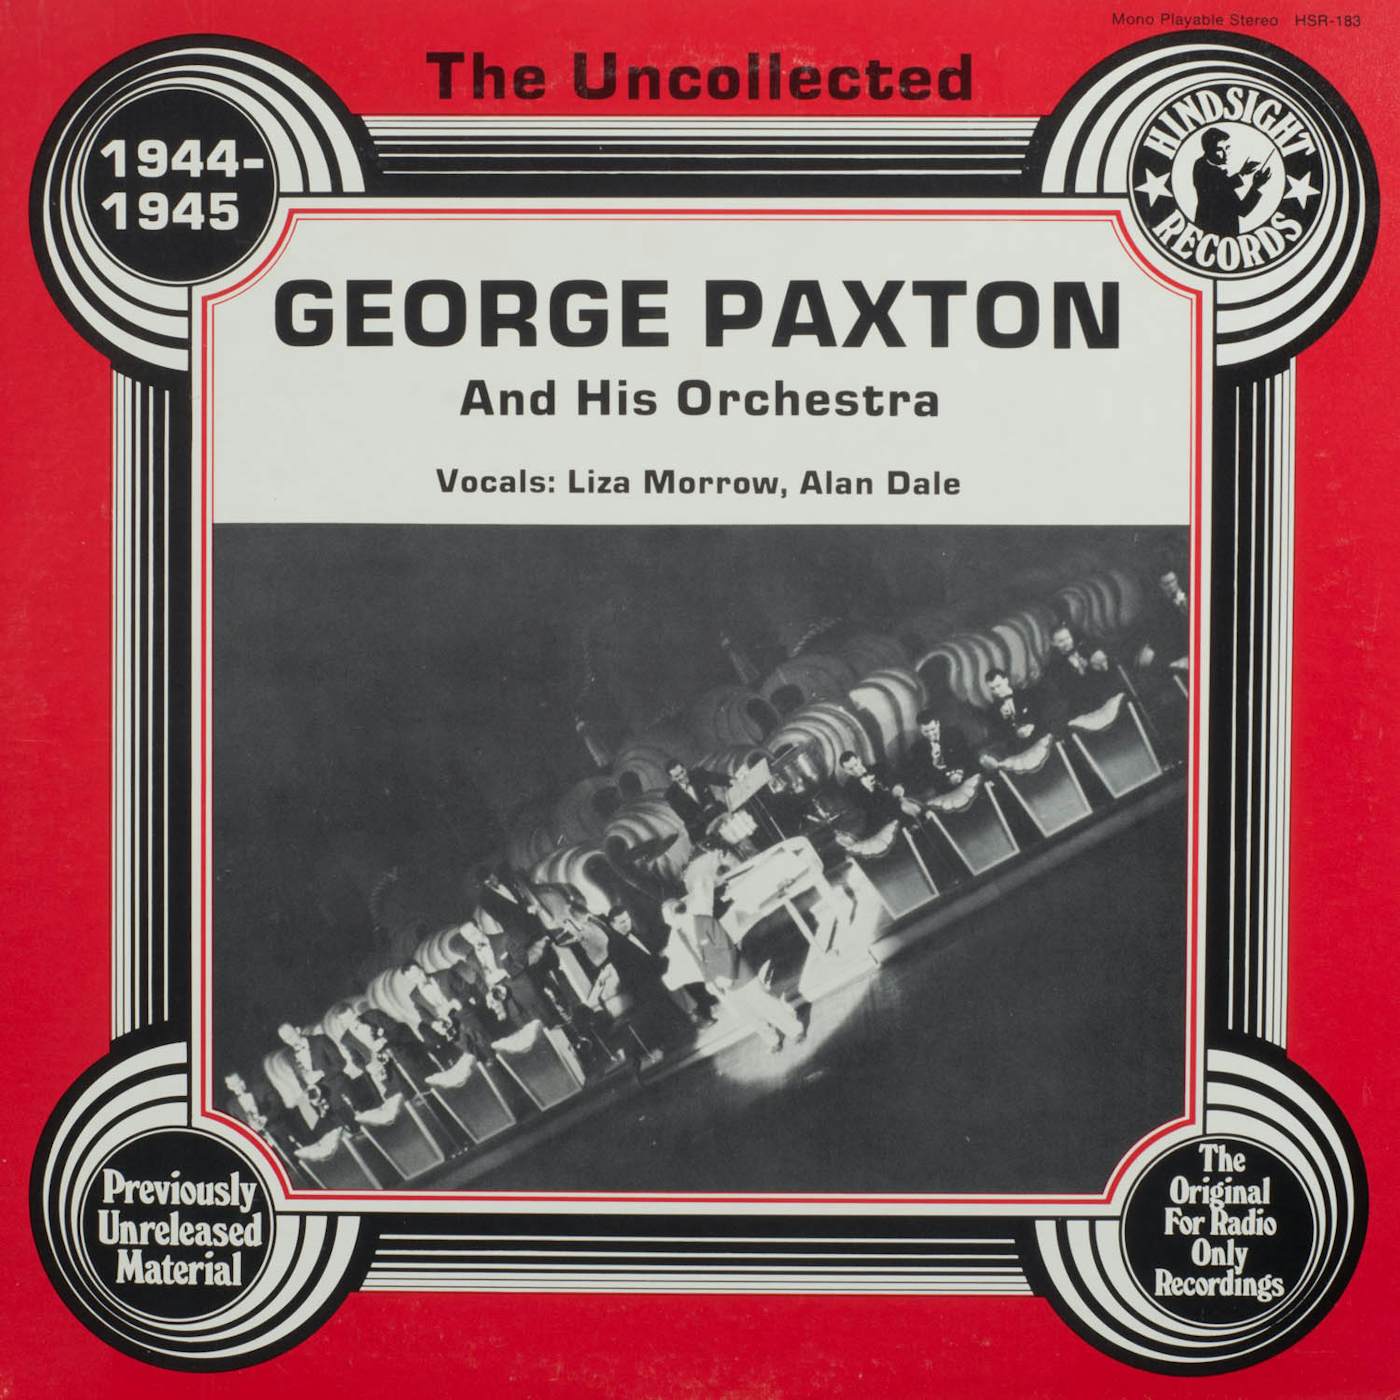 George Paxton and His Orchestra UNCOLLECTED Vinyl Record